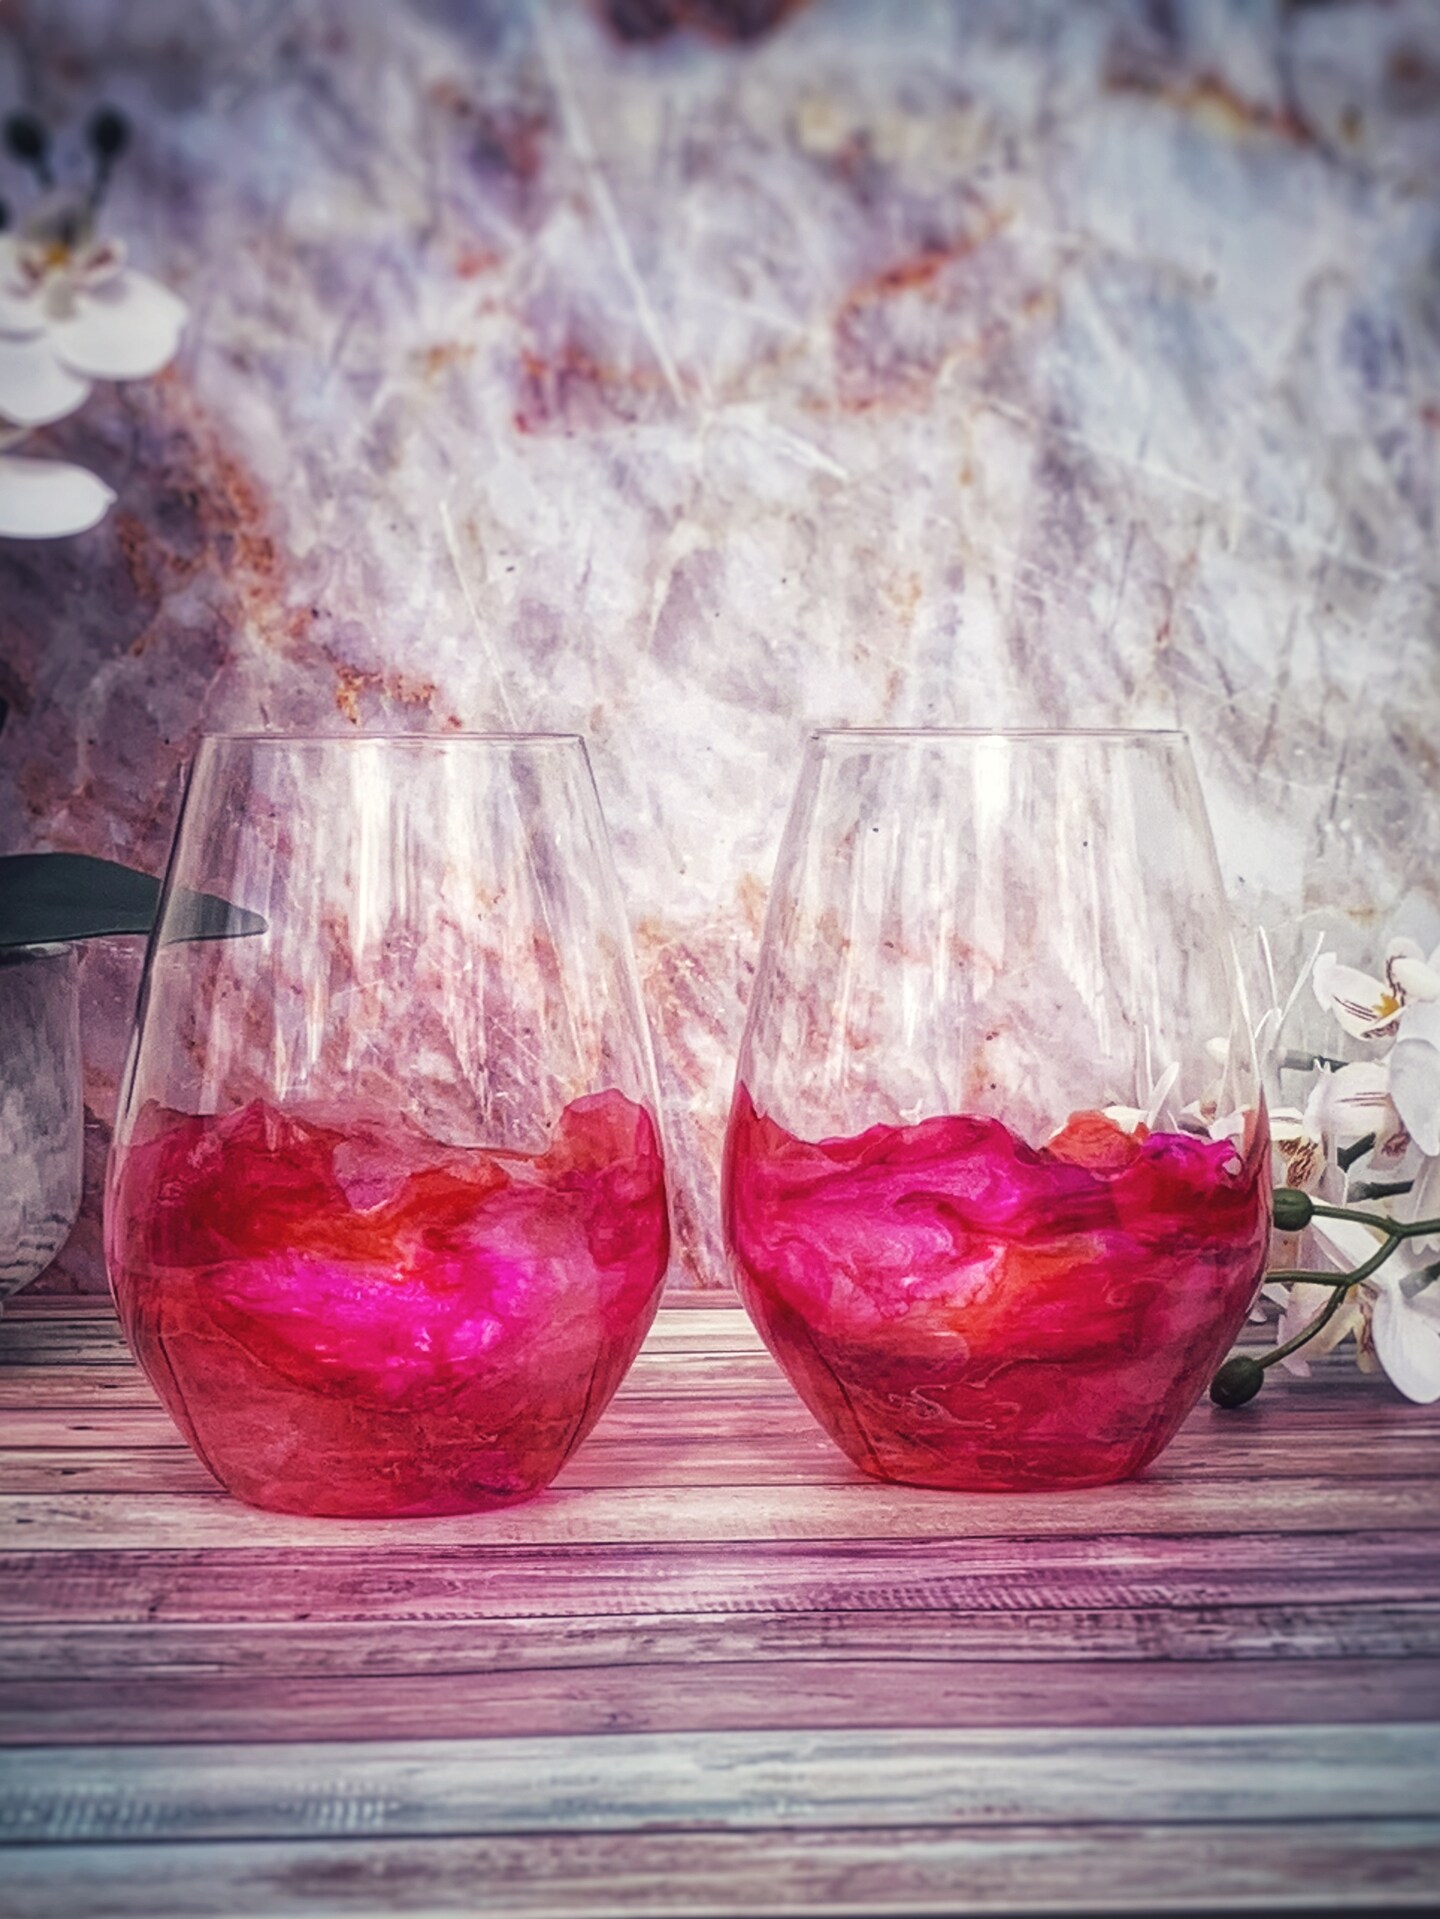 Pink wine glasses - stemless wineglasses finished with food safe